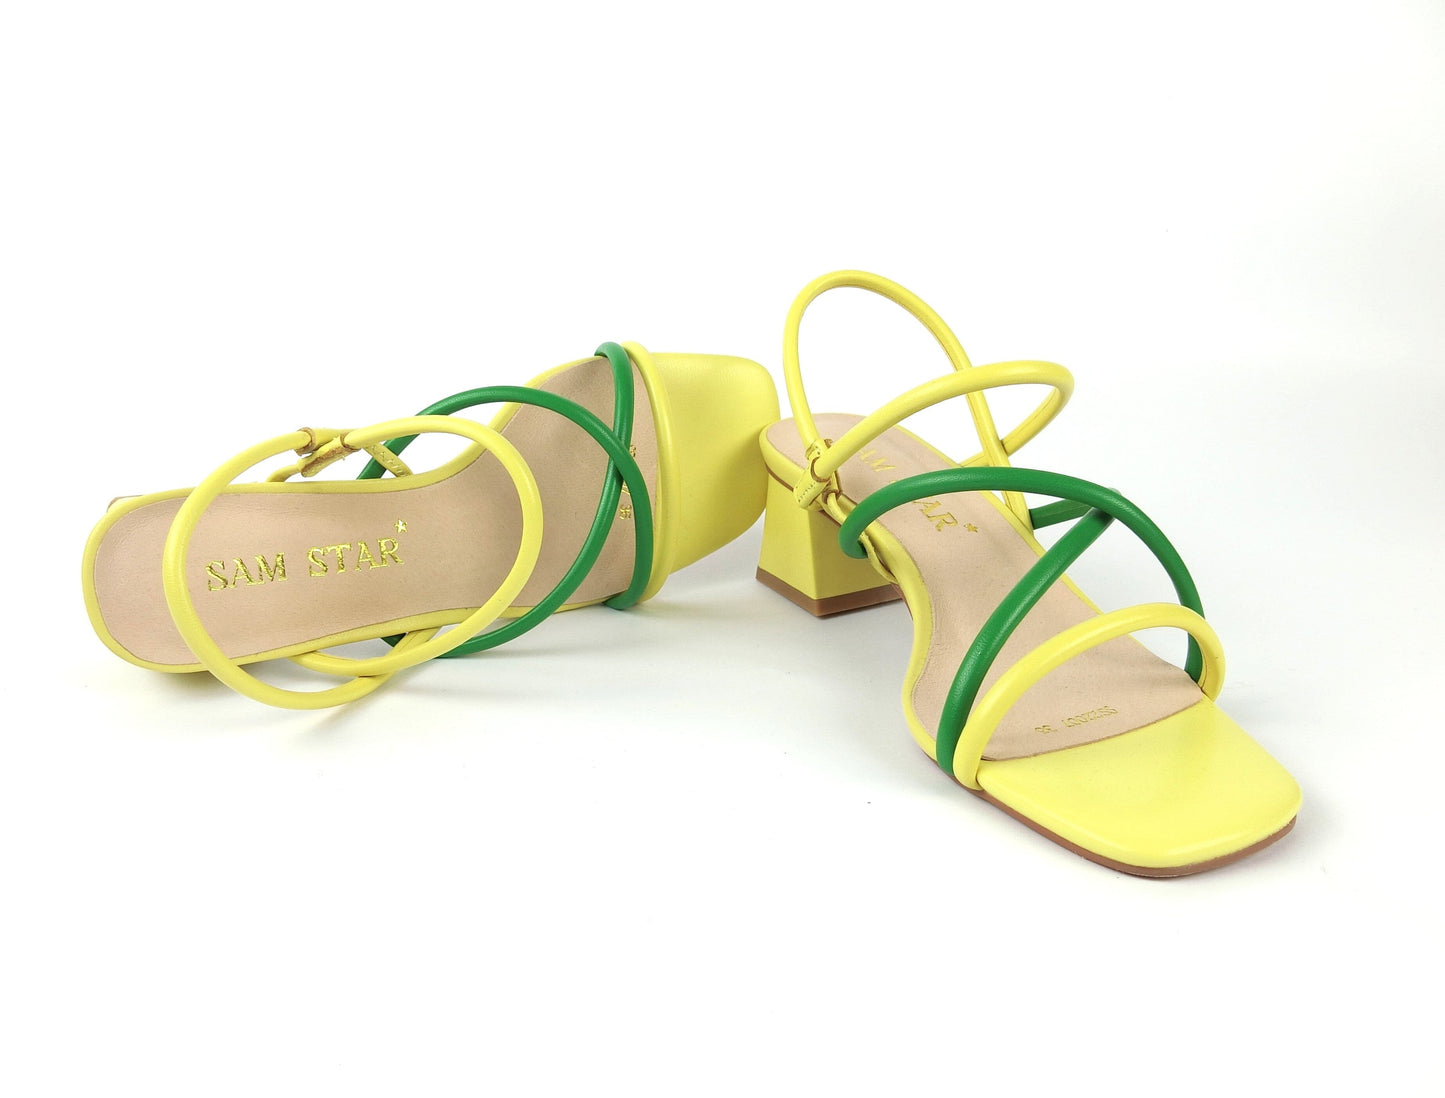 SS22008 Genuine leather strappy block heel sandals in Green and Yellow sandals Sam Star Shoes 